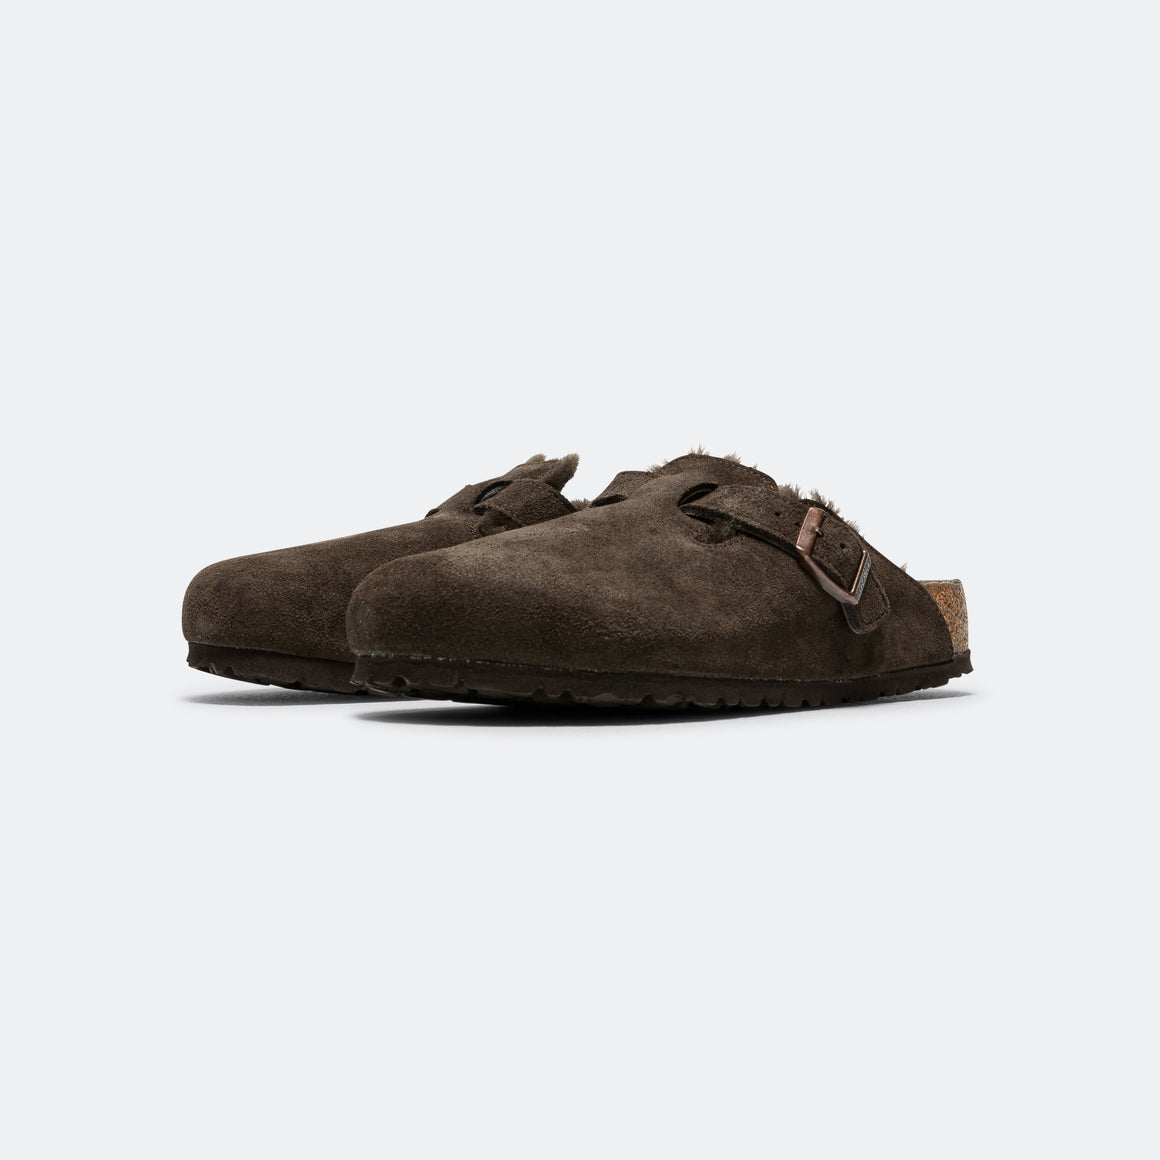 Birkenstock - Boston - Mocca Suede Leather/Shearling - UP THERE